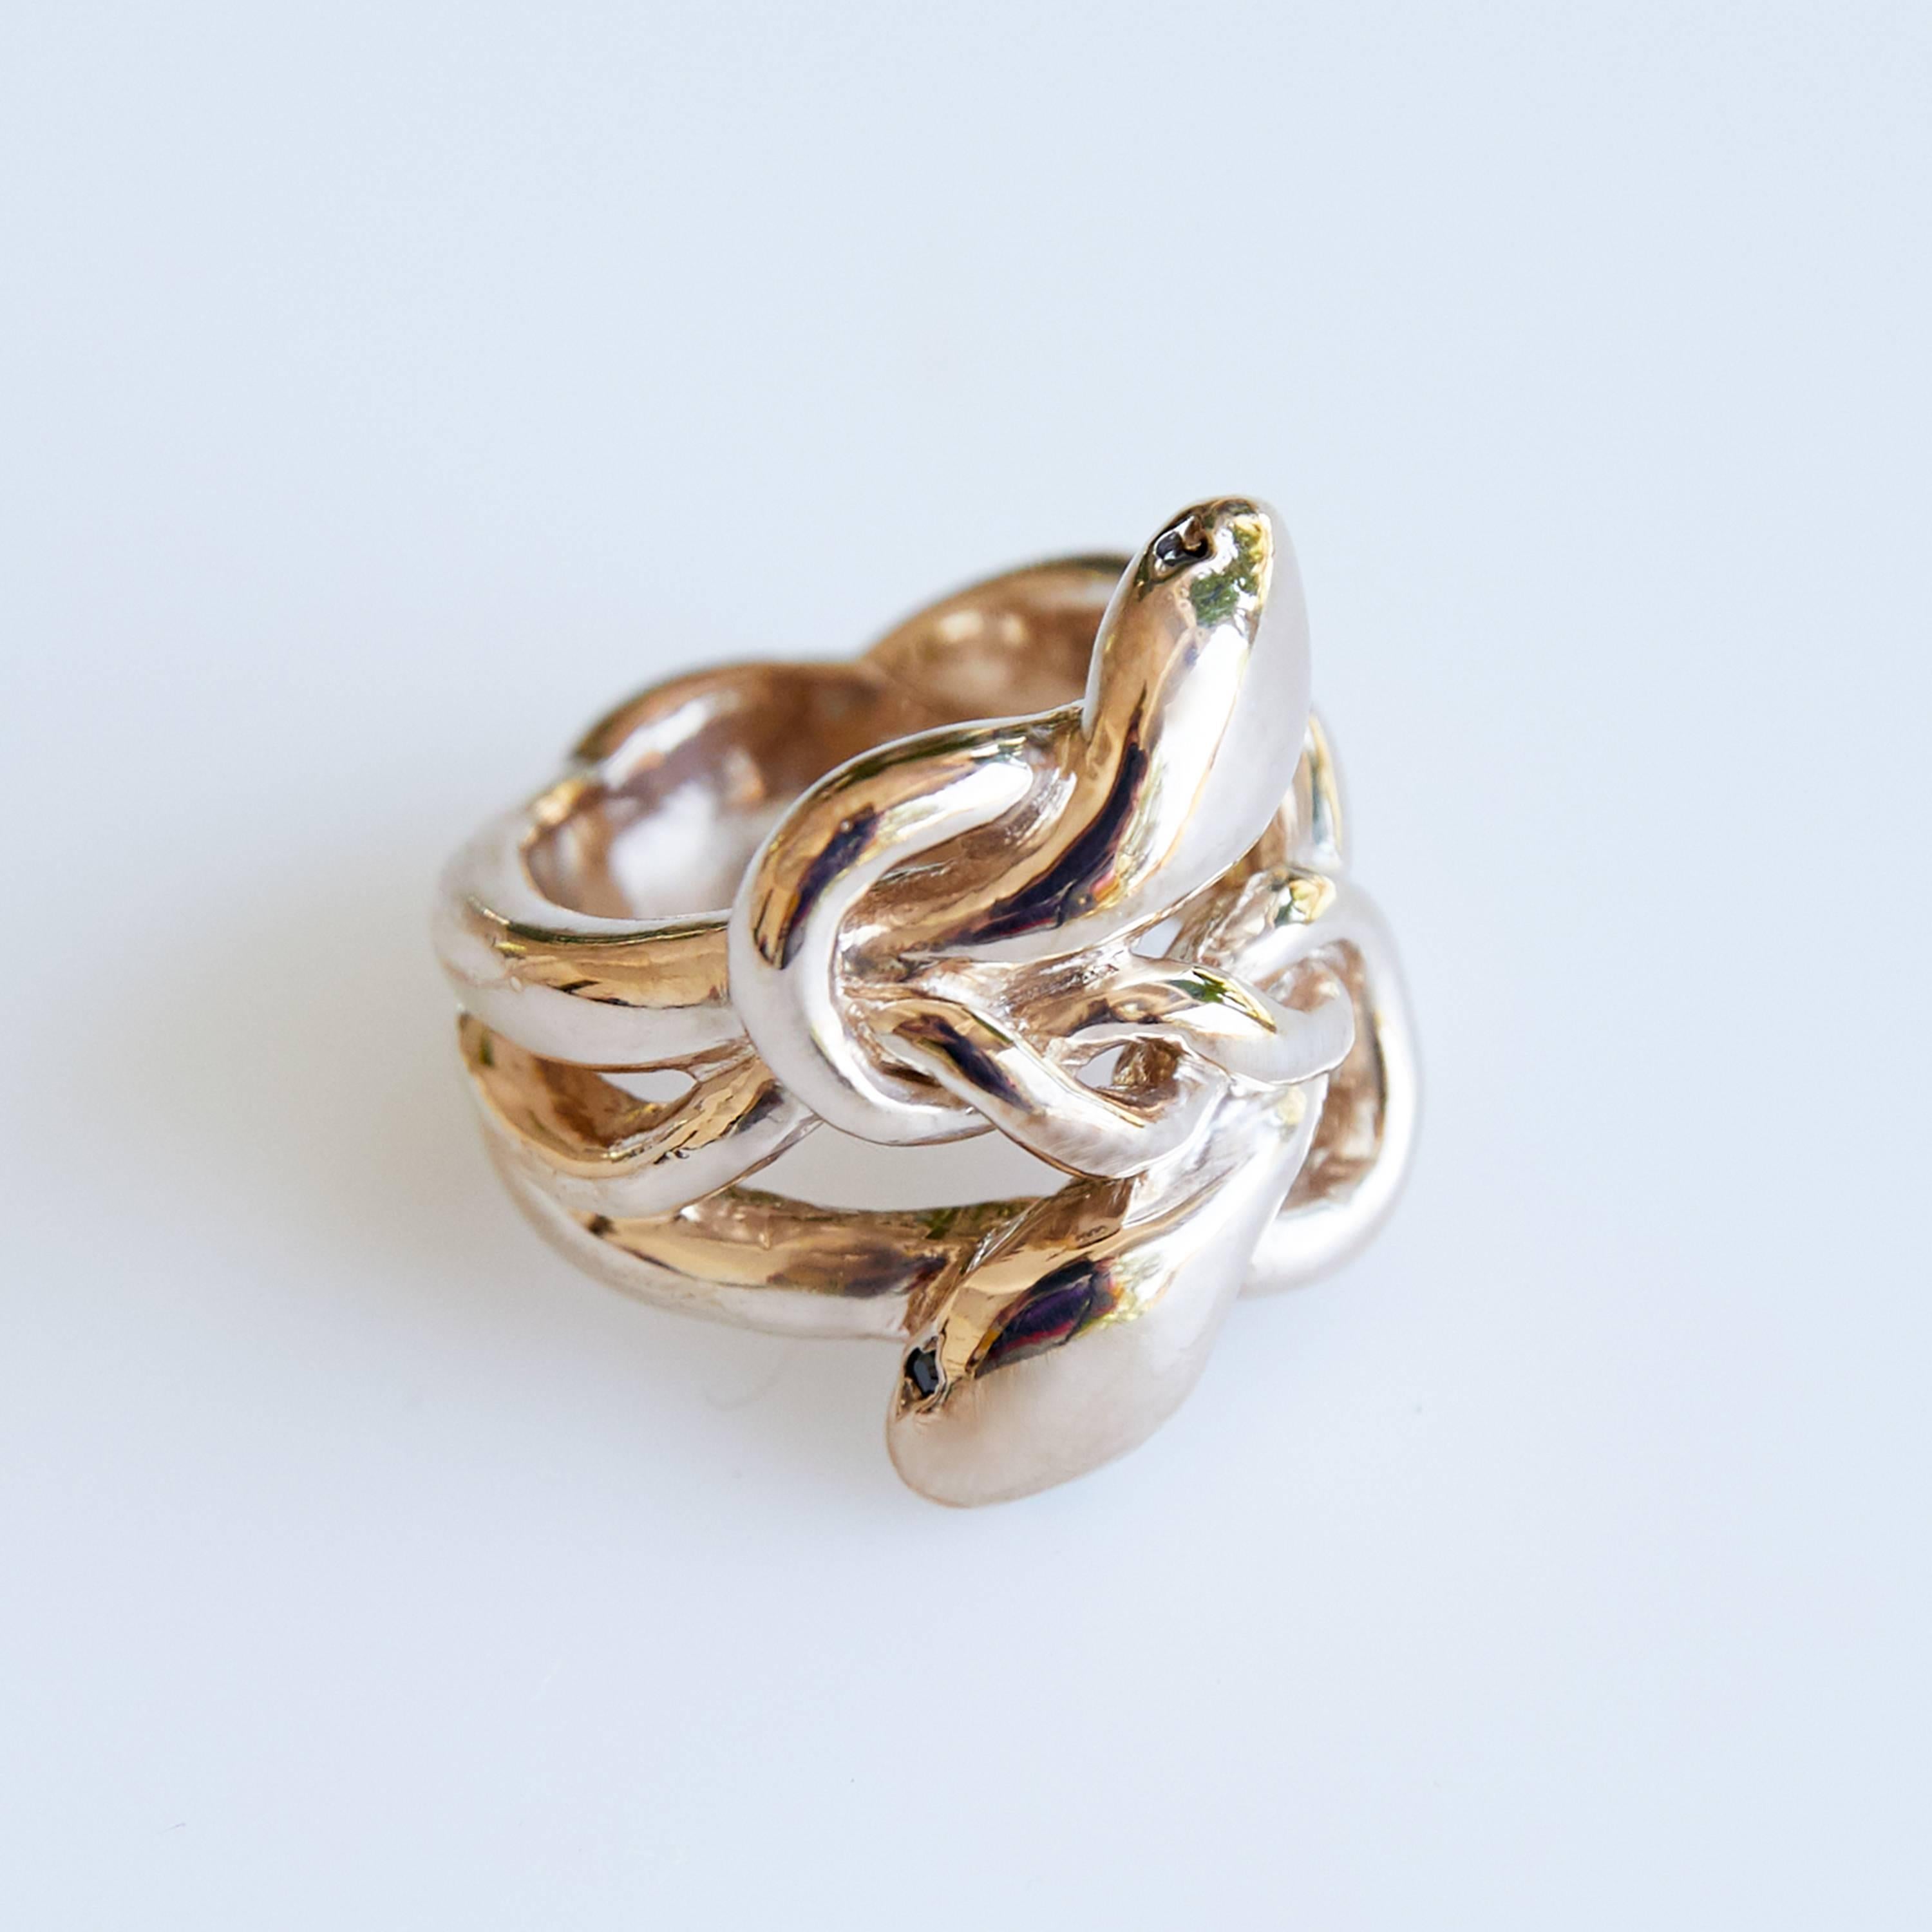 Contemporary Black Diamond Ring Double Head Snake Ring Bronze Cocktail Ring J Dauphin For Sale